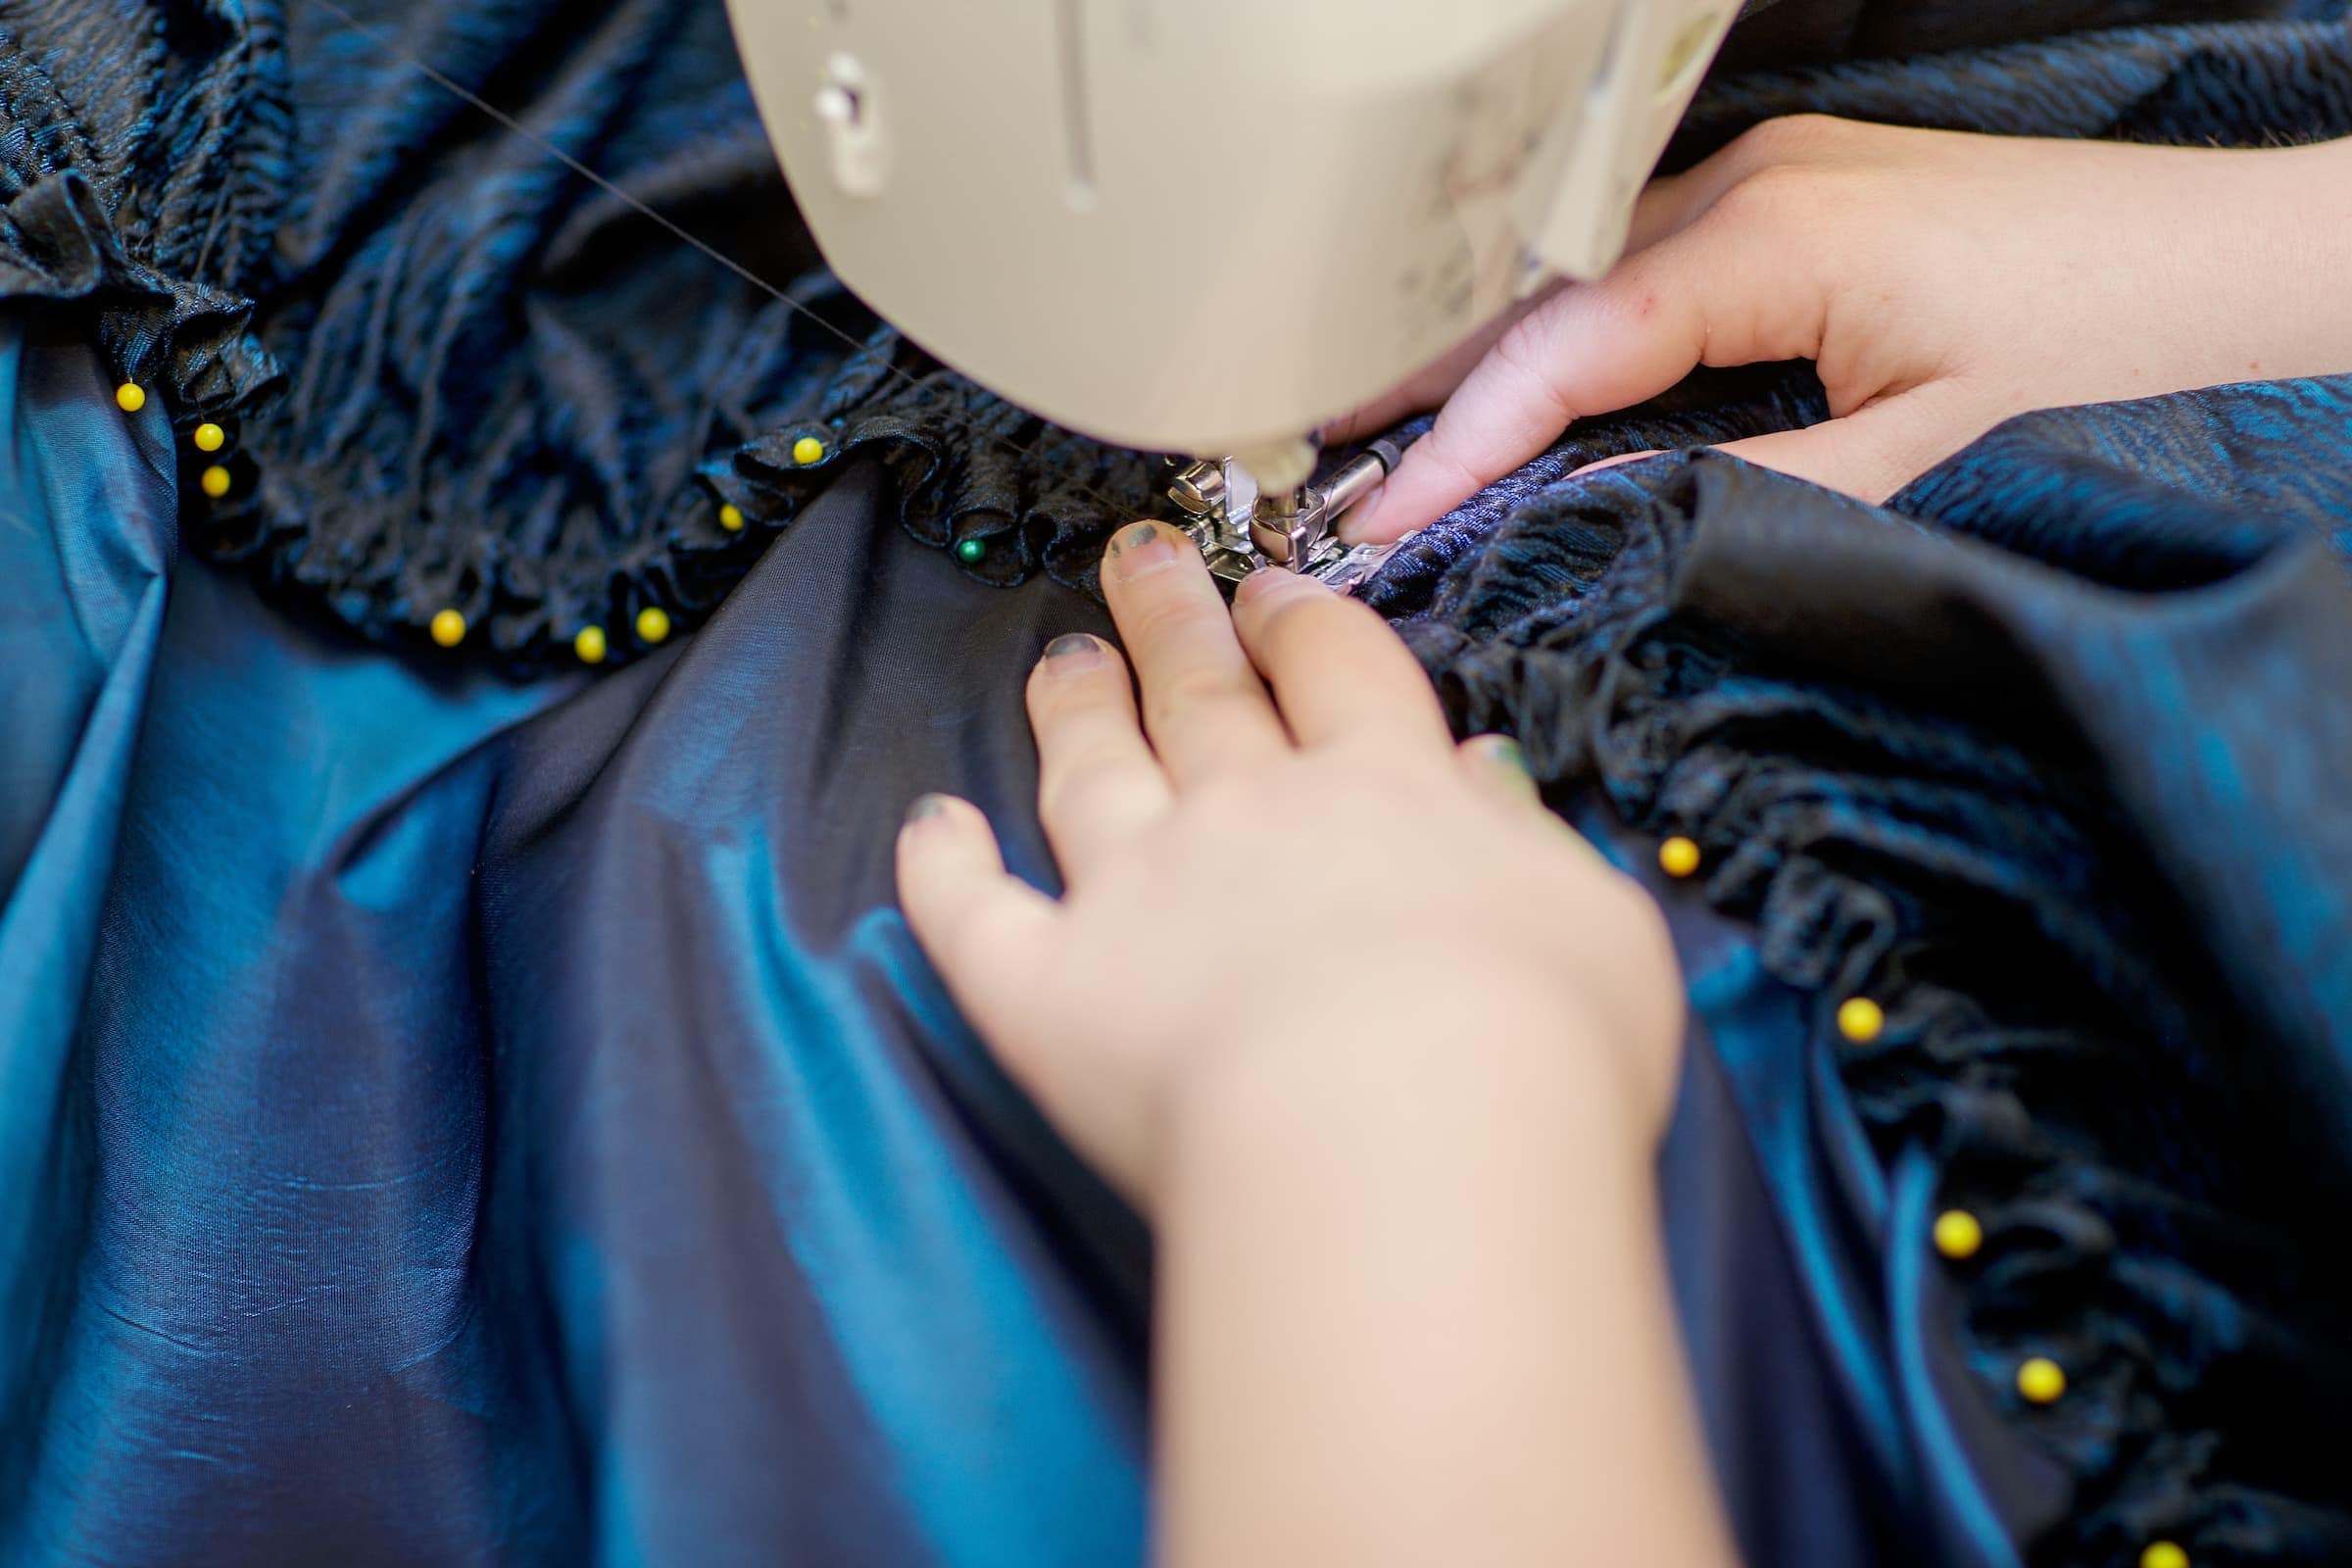 Rebecca Kendrick works on sewing a costume for a production of 